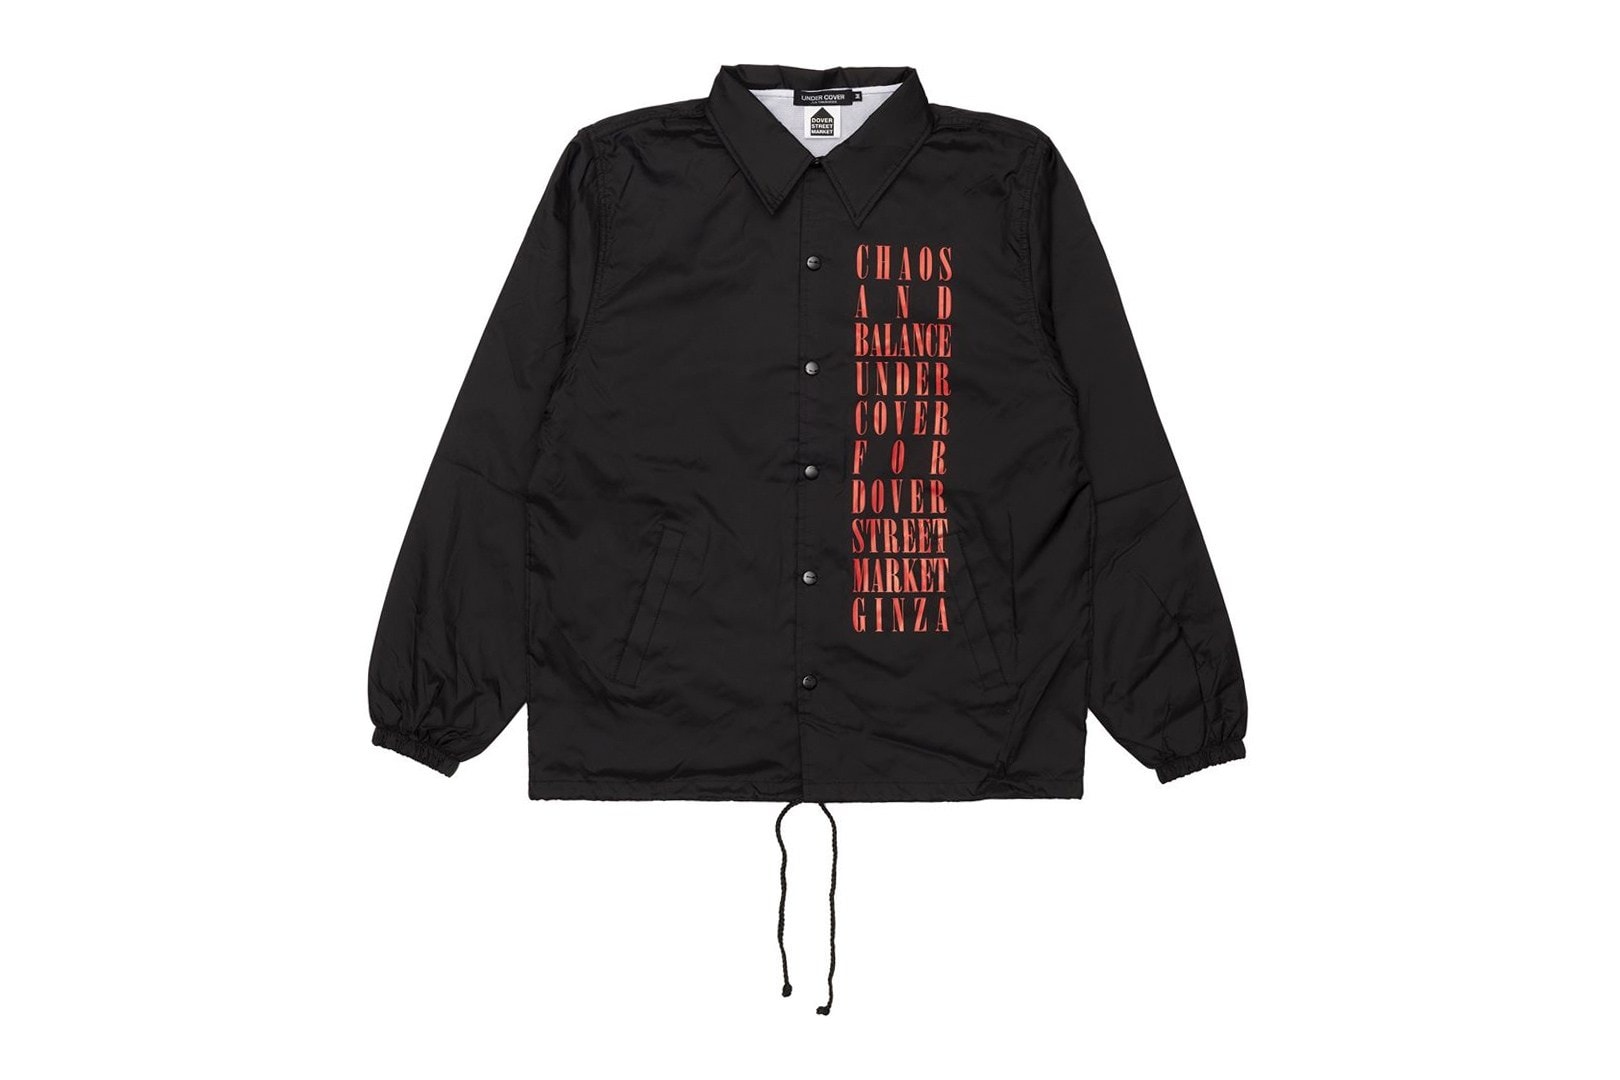 UNDERCOVER x Dover Street Market Ginza 5th Anniversary "Chaos and Balance" Capsule